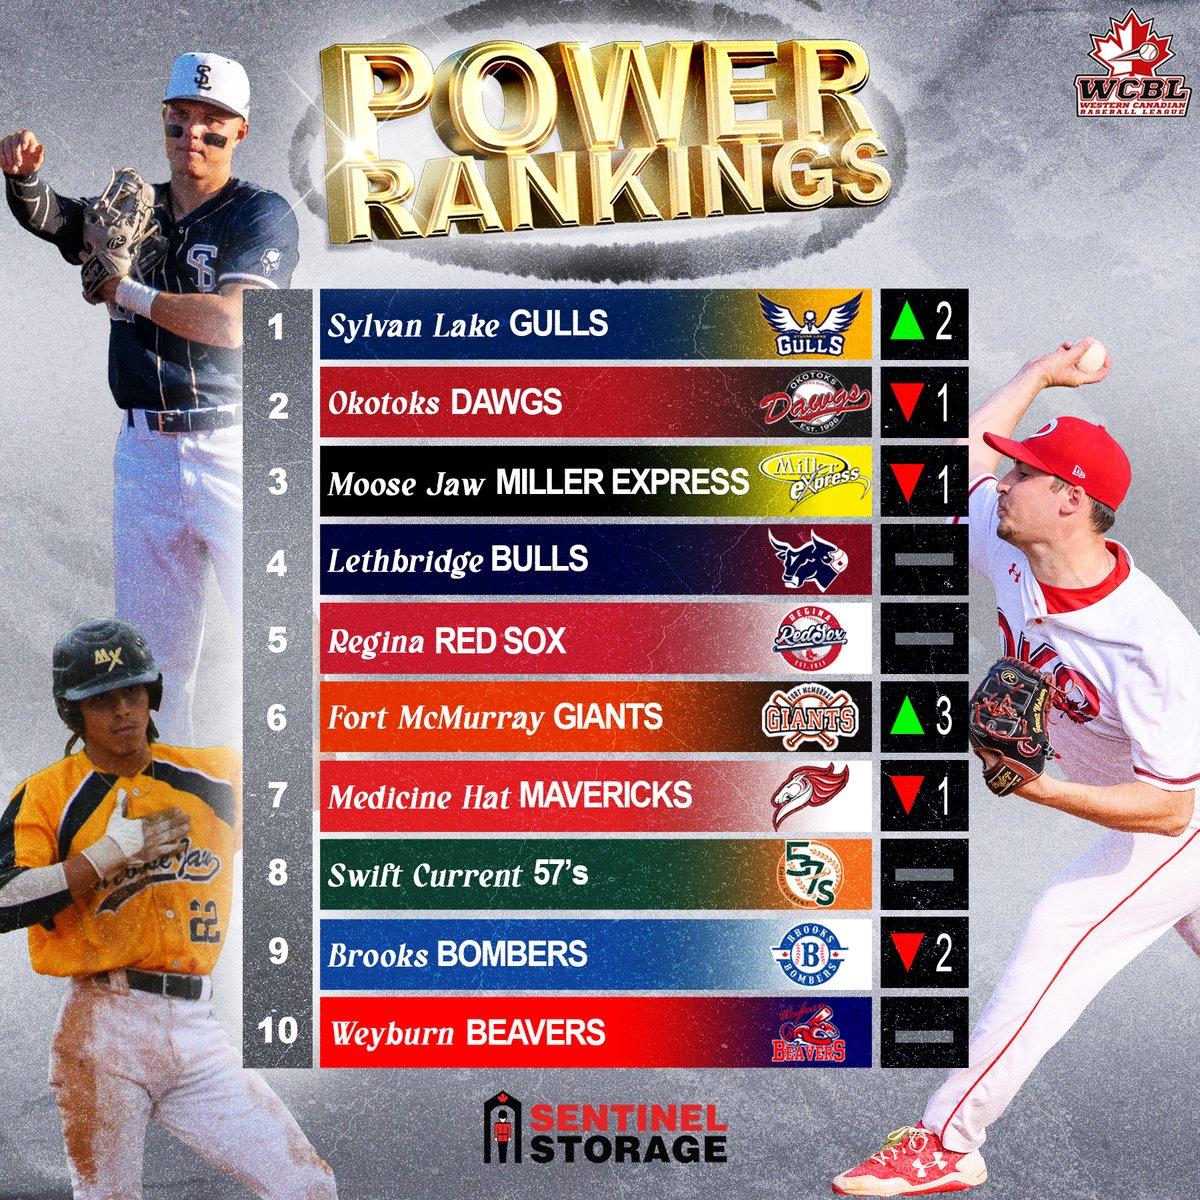 Here's how this weeks Power Rankings look following a crazy week of WCBL baseball! 💪

Presented by Sentinel Storage

#WCBL #PlayInOurPark